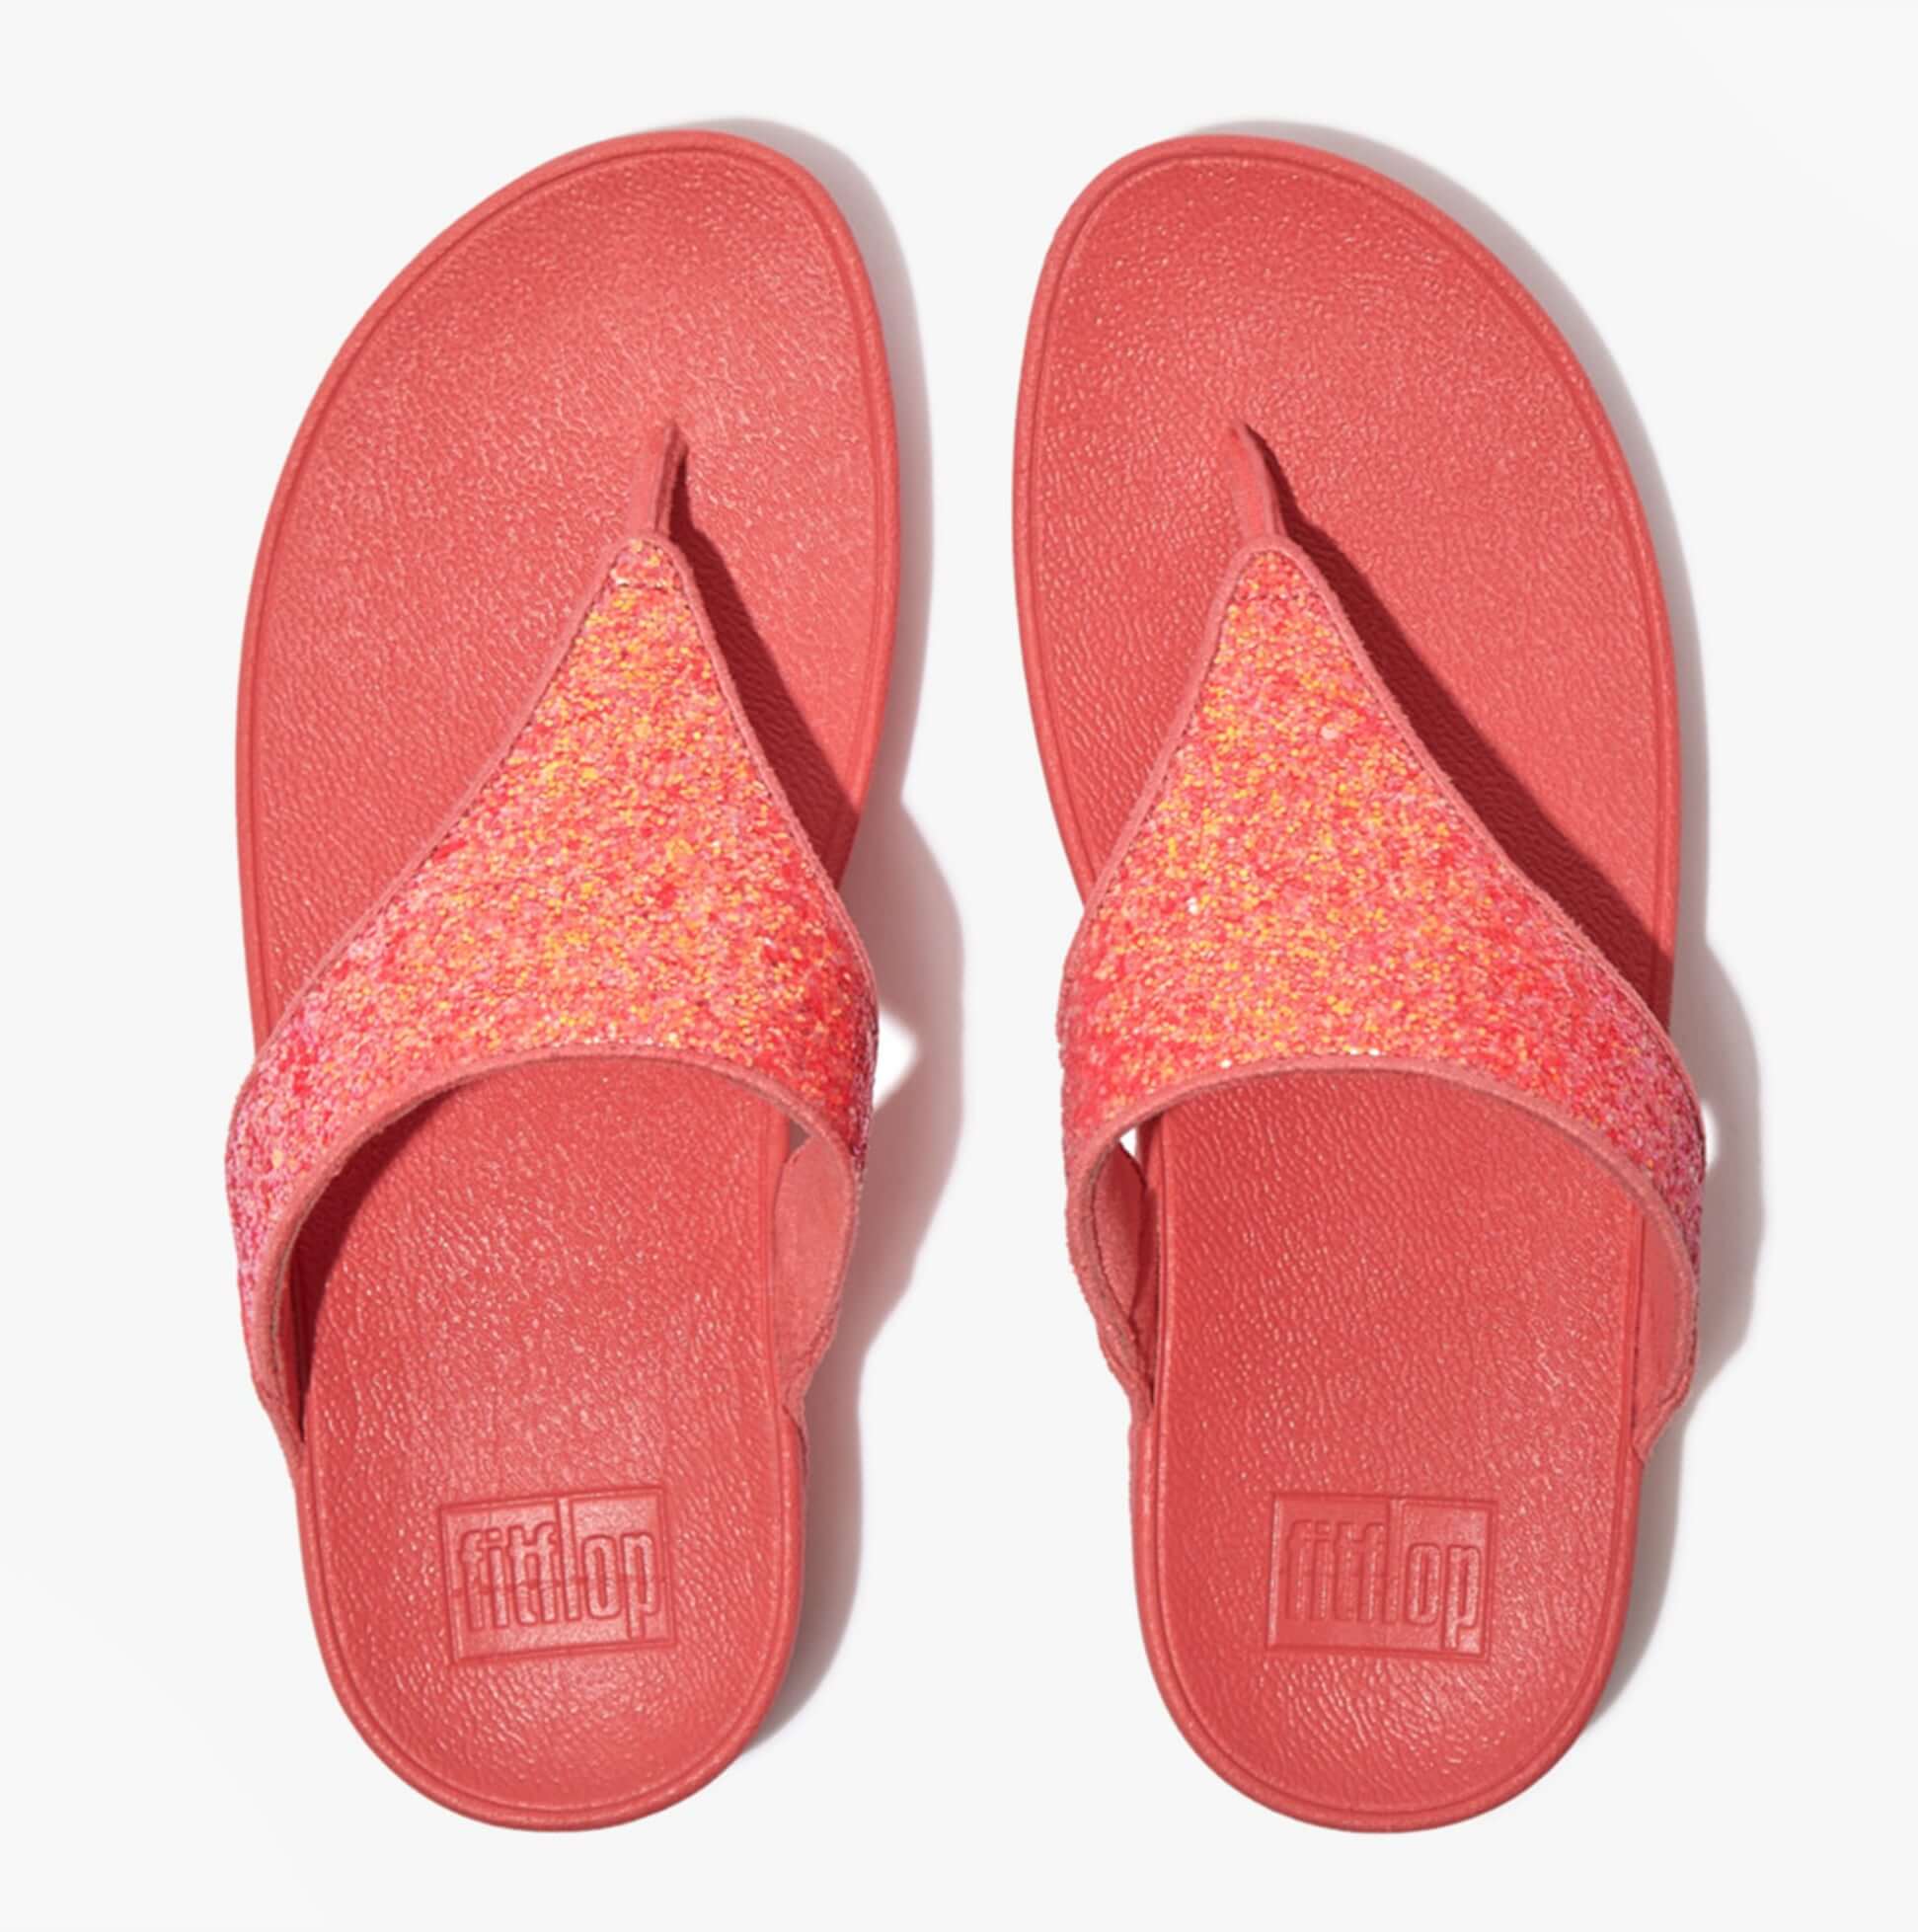 FitFlop-[X03-B09]-RosyCoral-2.jpg